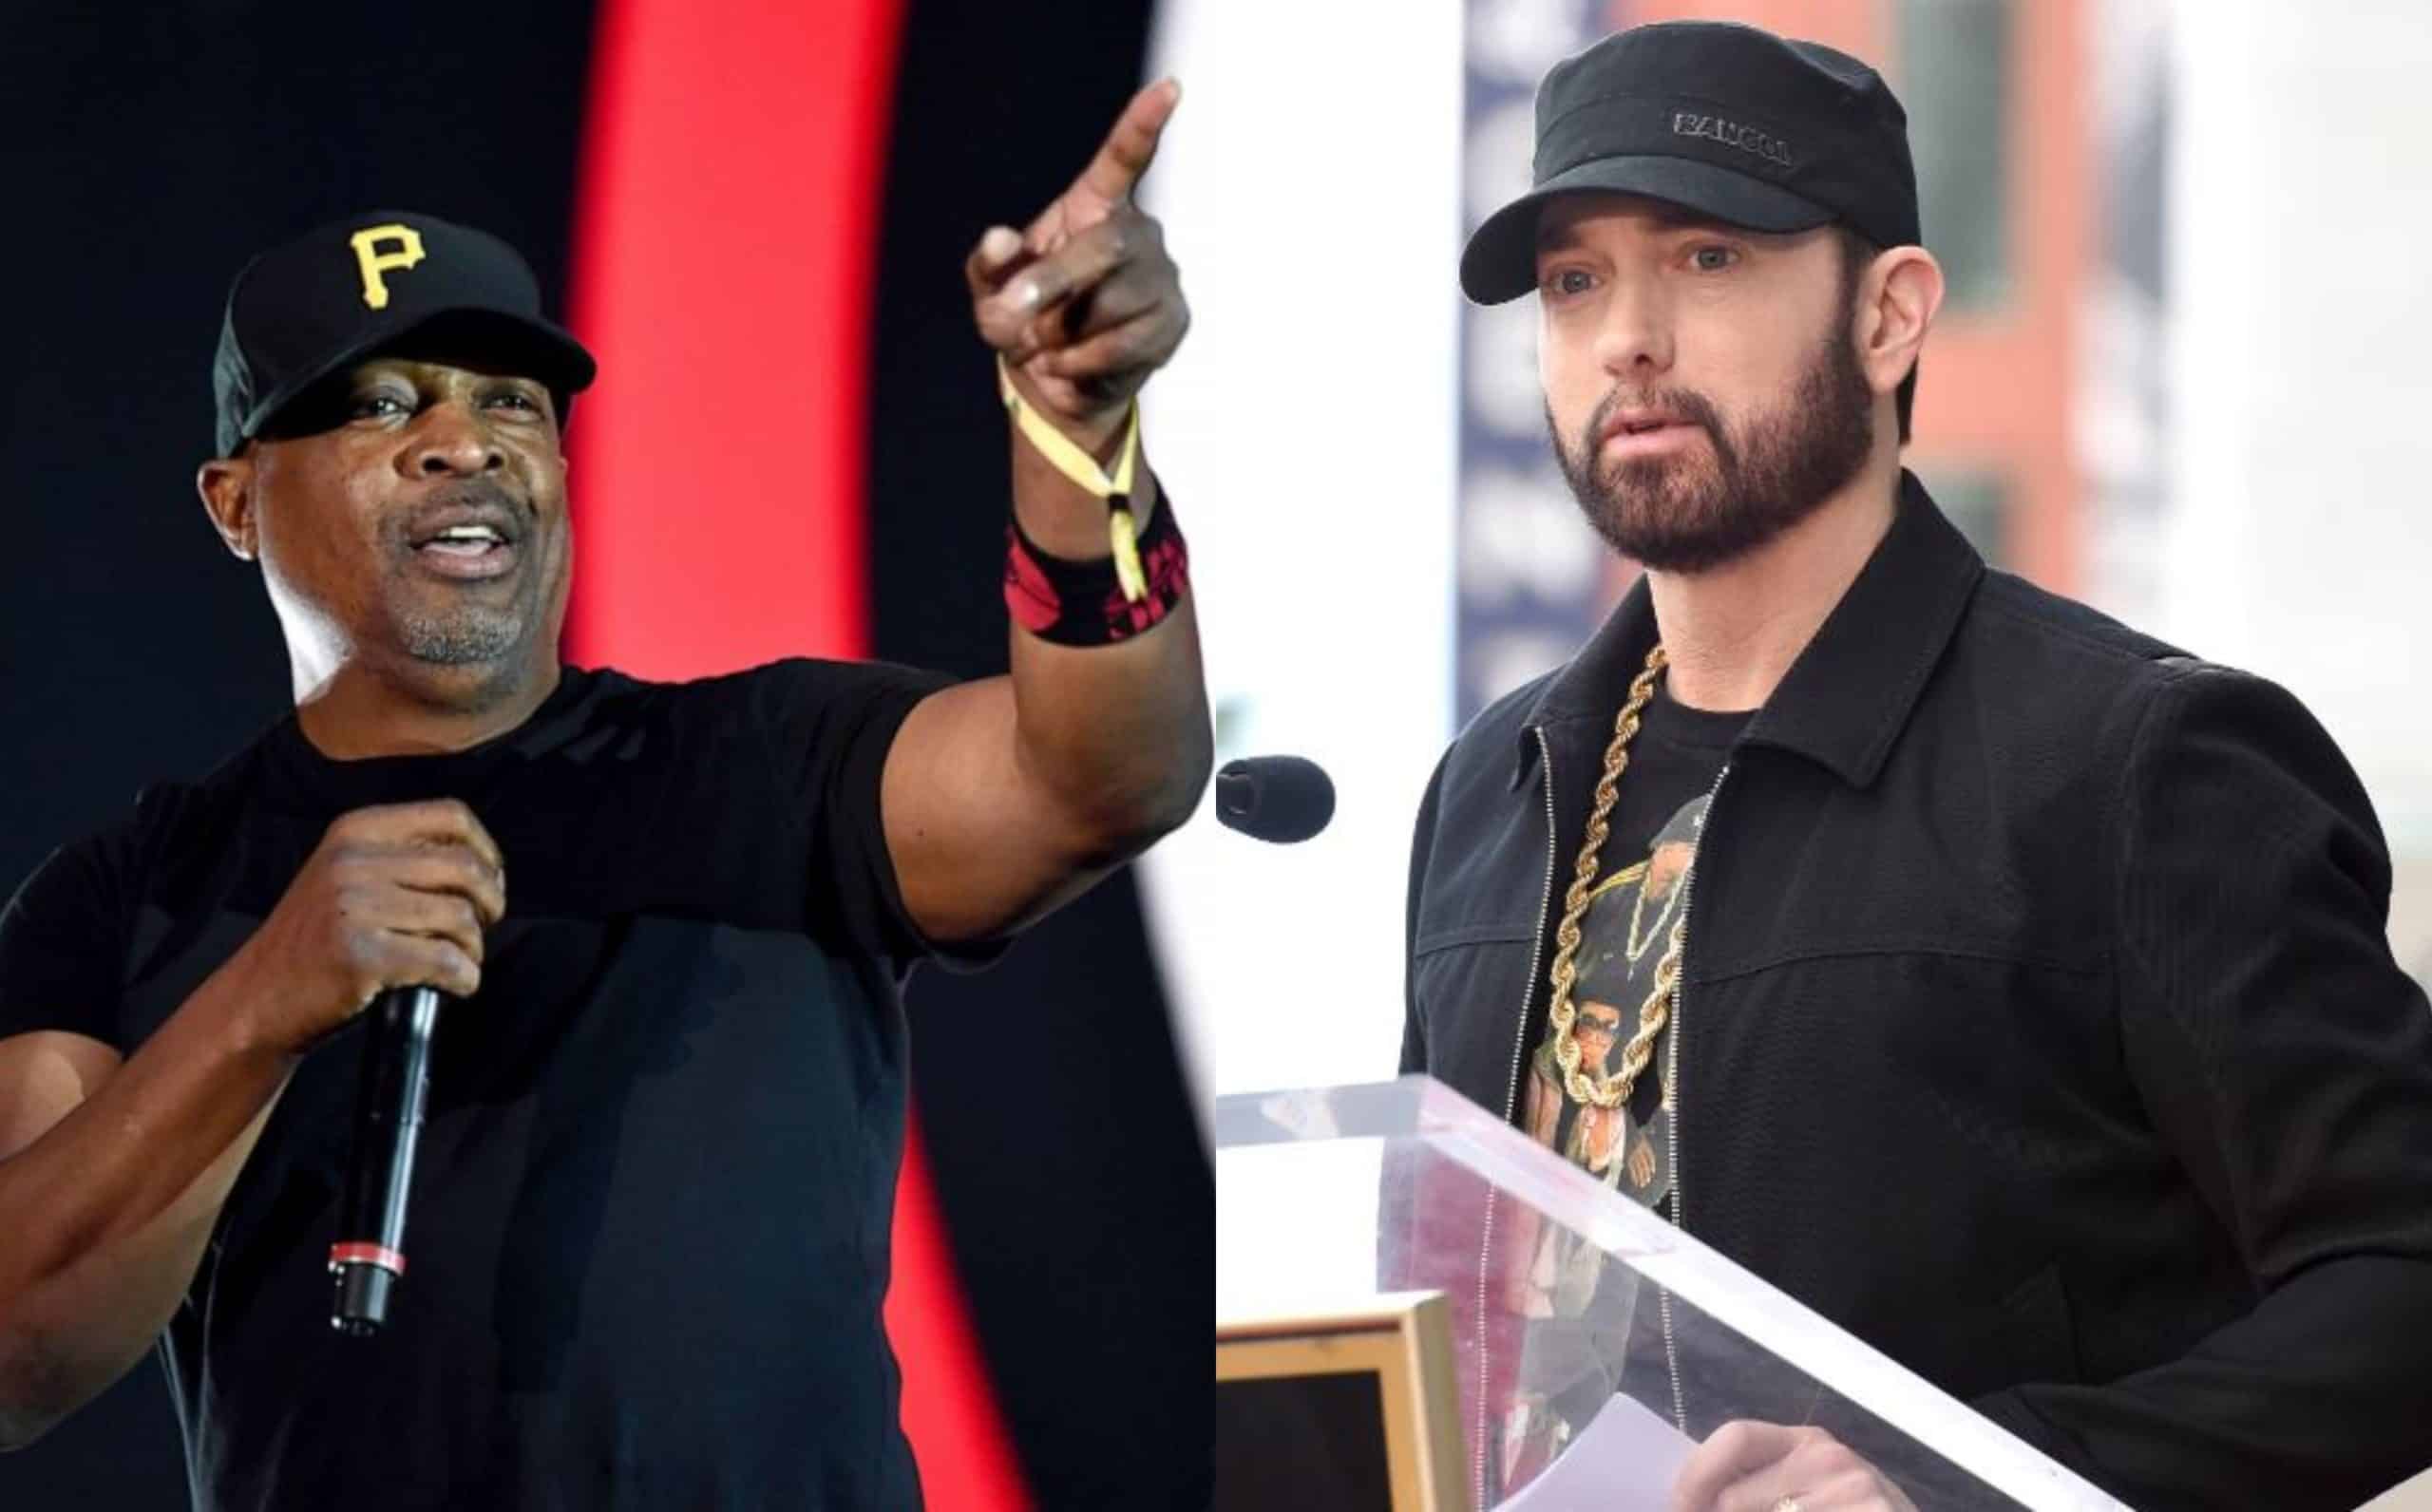 Chuck D Applauds Eminem For Fighting Against Racism Througout his Career